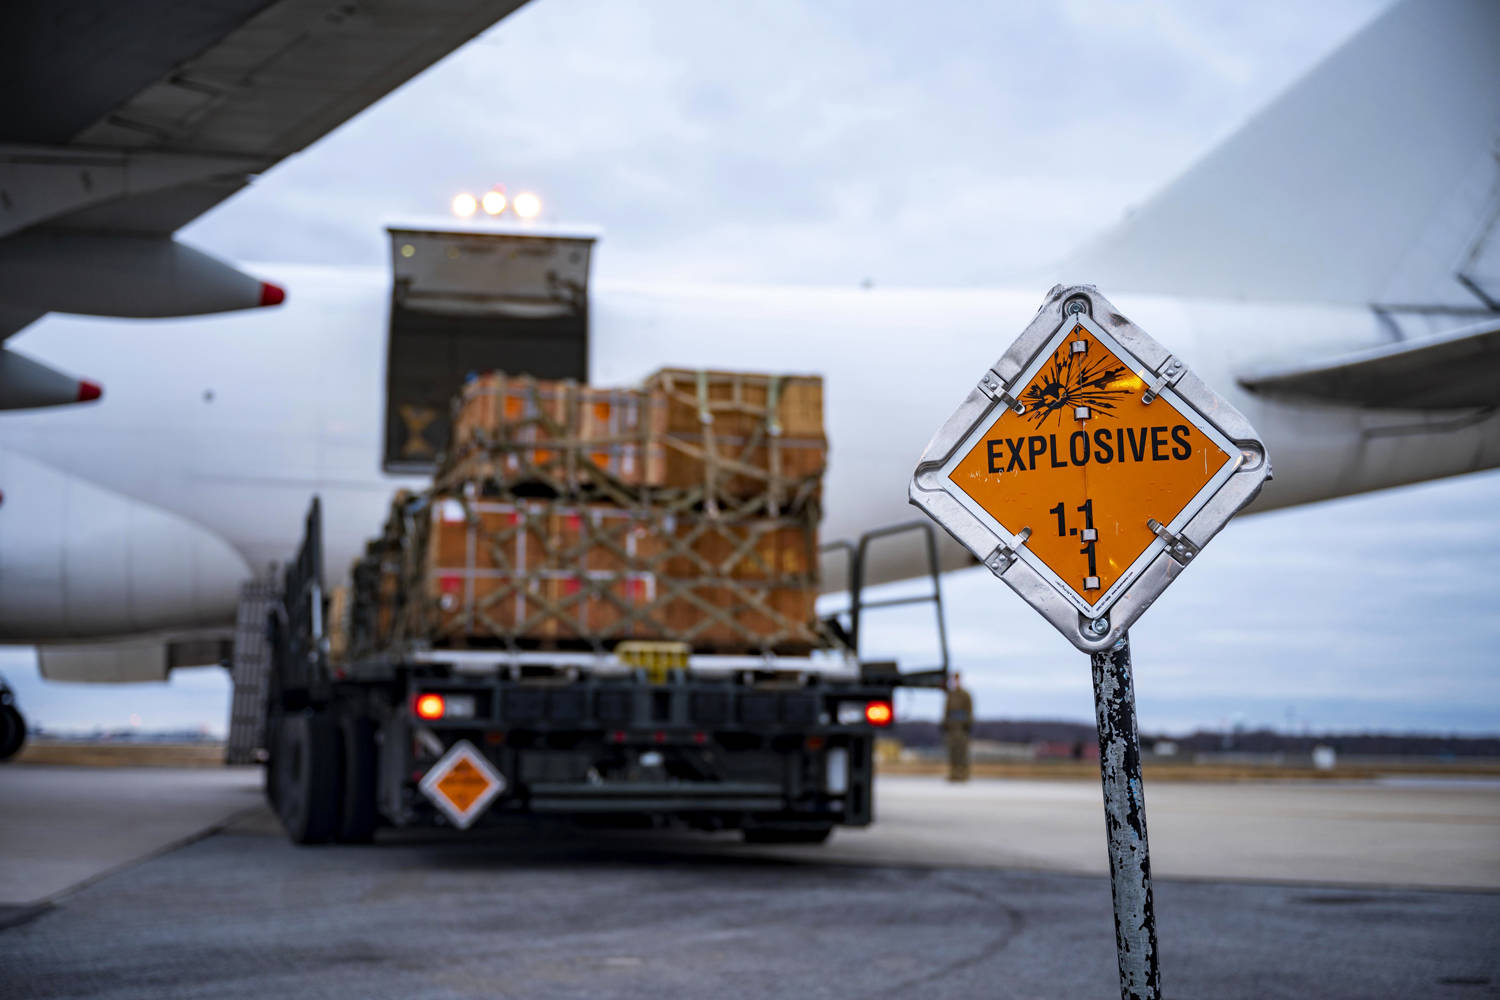 An explosives sign marks the cordon around a commercial aircraft during a security assistance mission at Dover Air Force Base, Del., Jan. 13, 2023. The United States has committed more than $24.5 billion in security assistance to Ukraine since the beginni. Photo: Air Force Airman 1st Class Amanda Jett